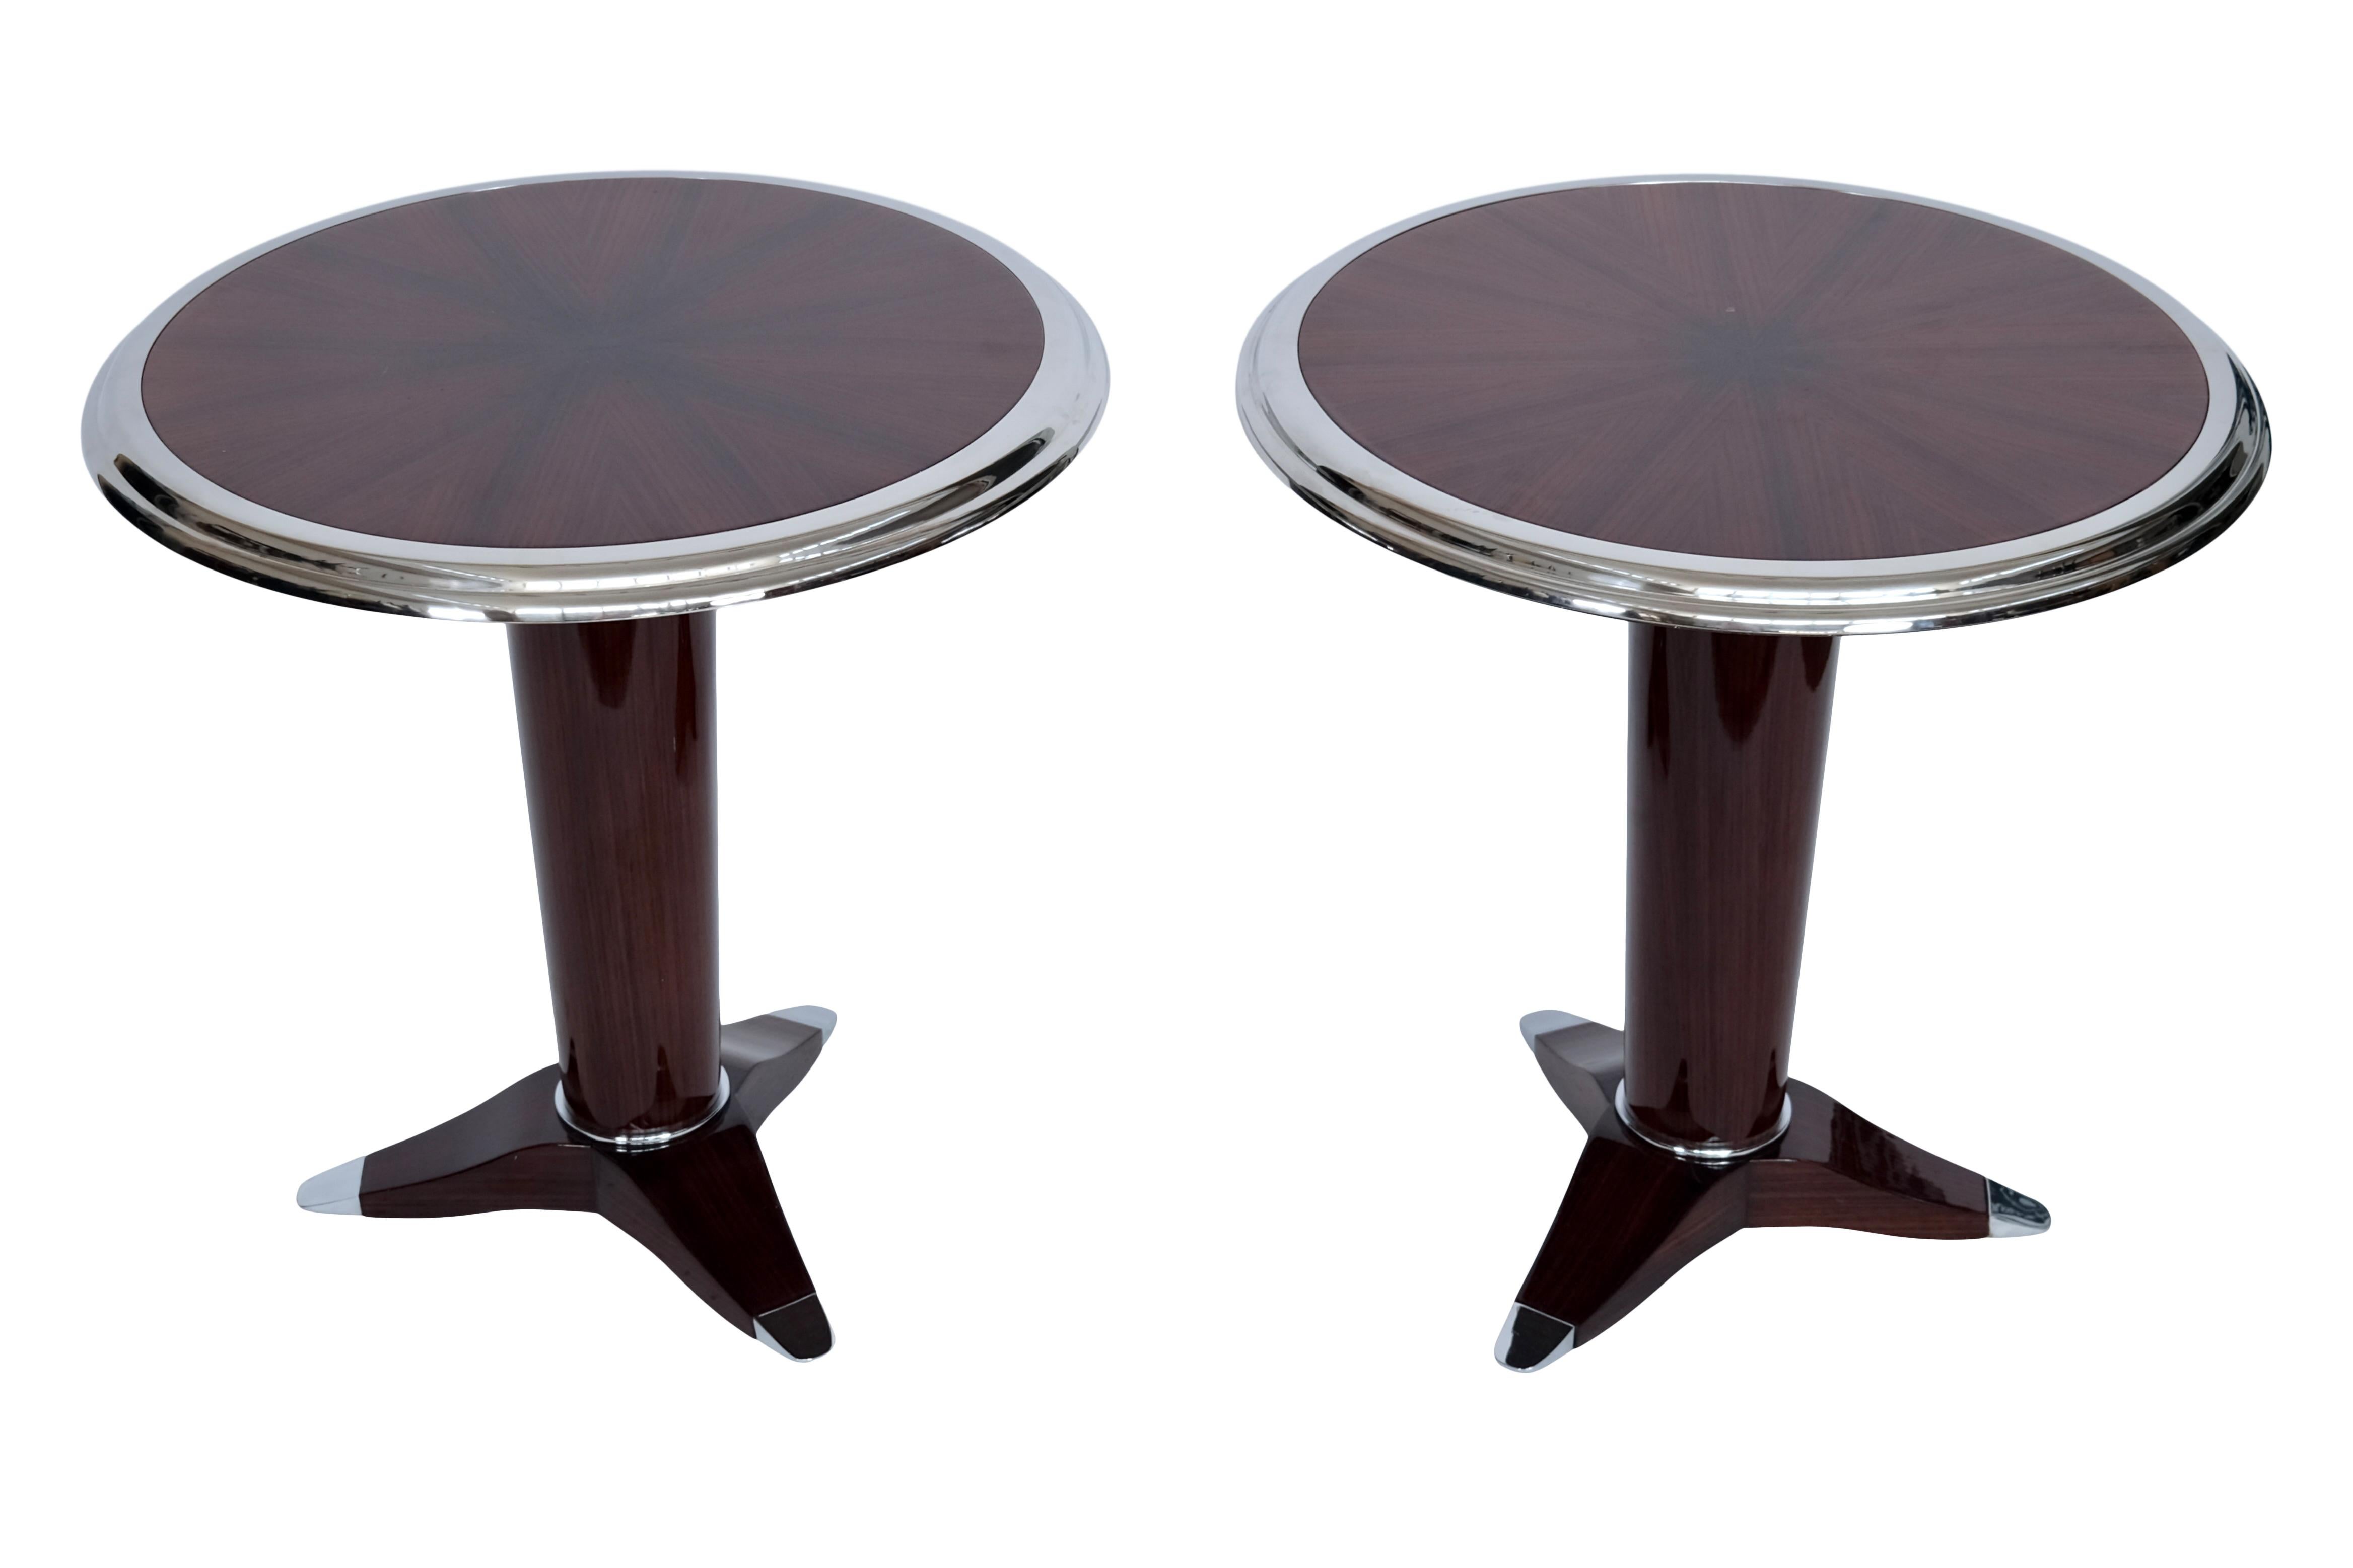 Round Art Deco Style Side Table in Lacquered Mahogany and Chrome For Sale 2